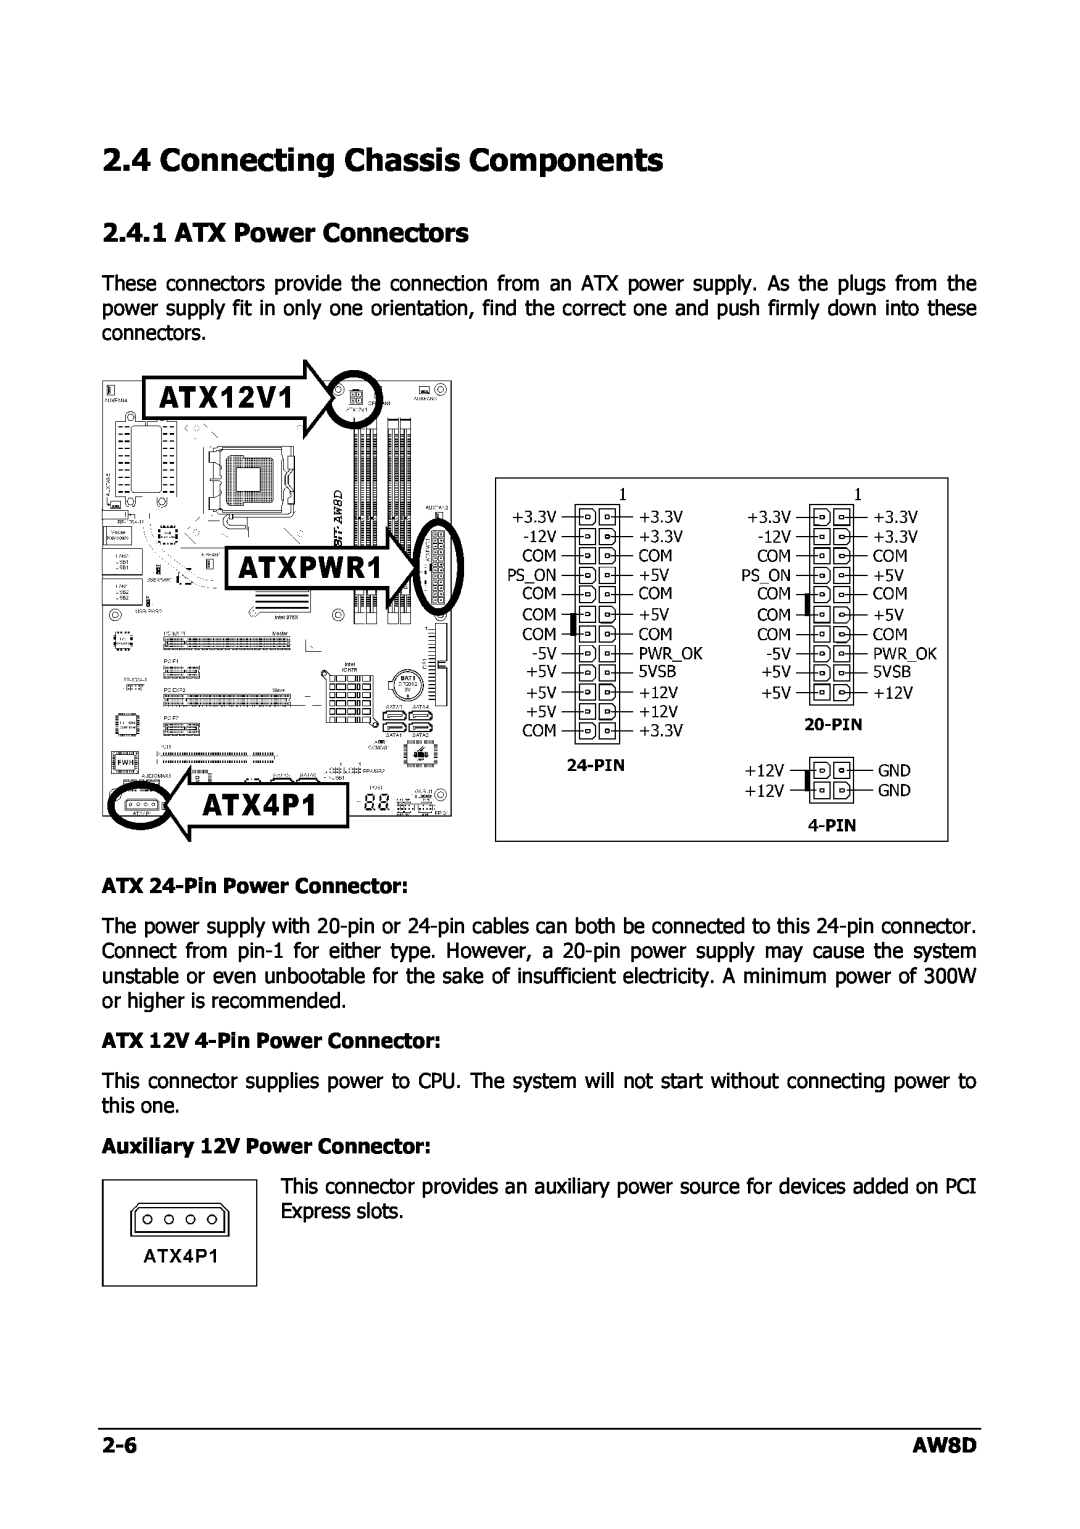 Intel AW8D user manual Connecting Chassis Components, ATX Power Connectors 